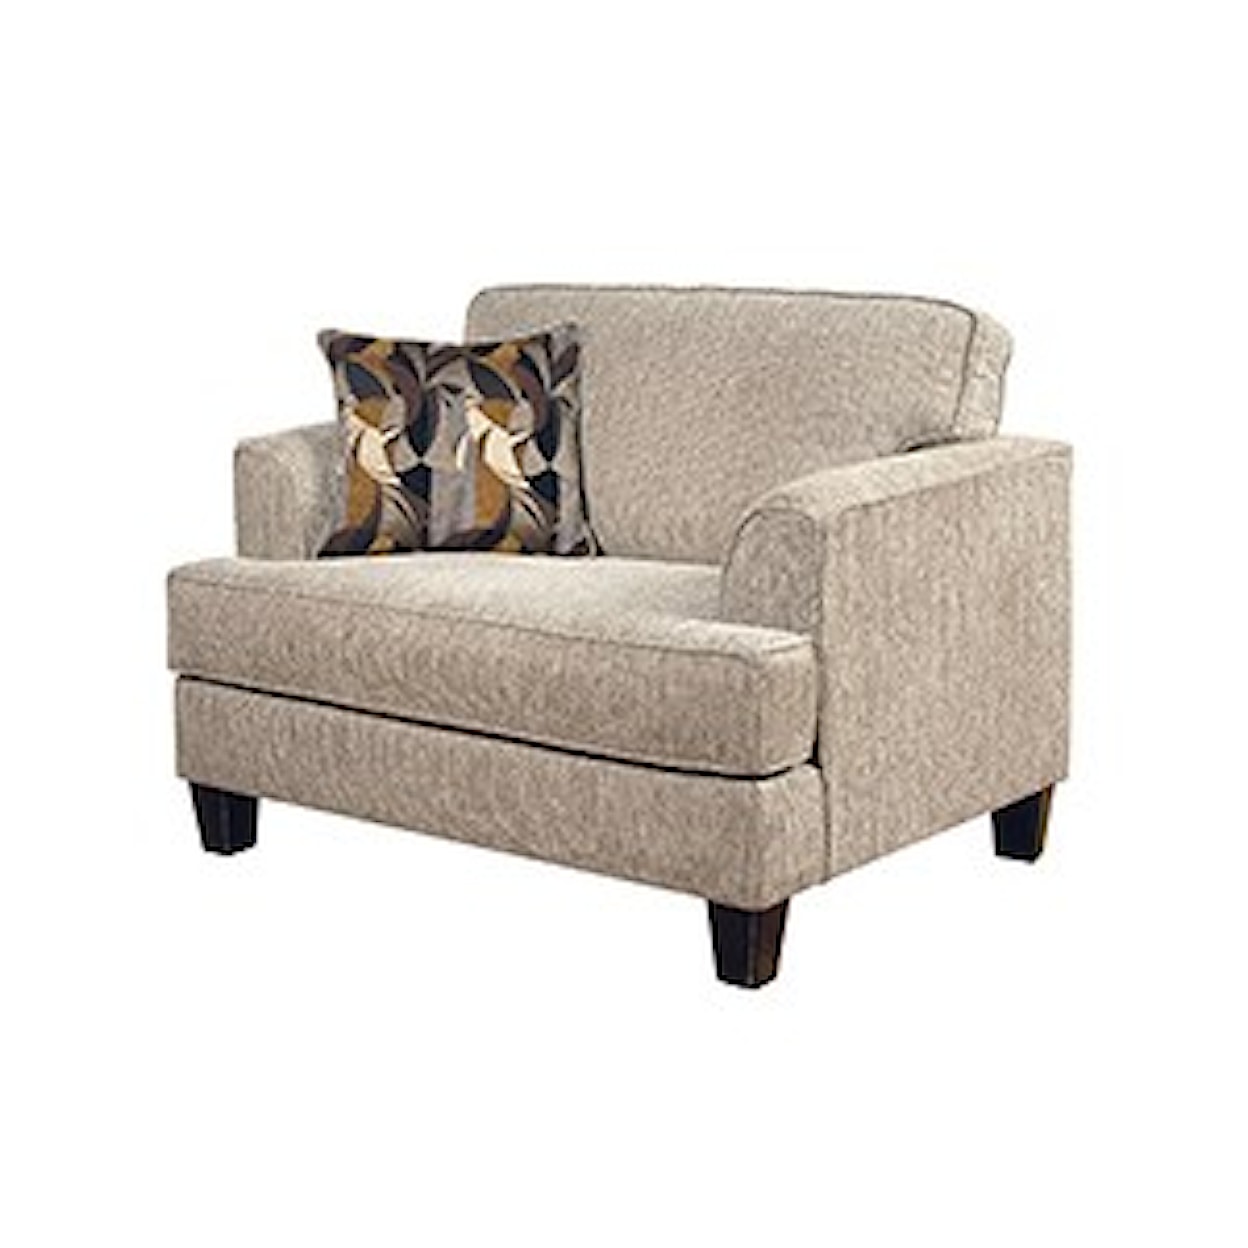 Serta Upholstery by Hughes Furniture 5600 Cuddle Chair